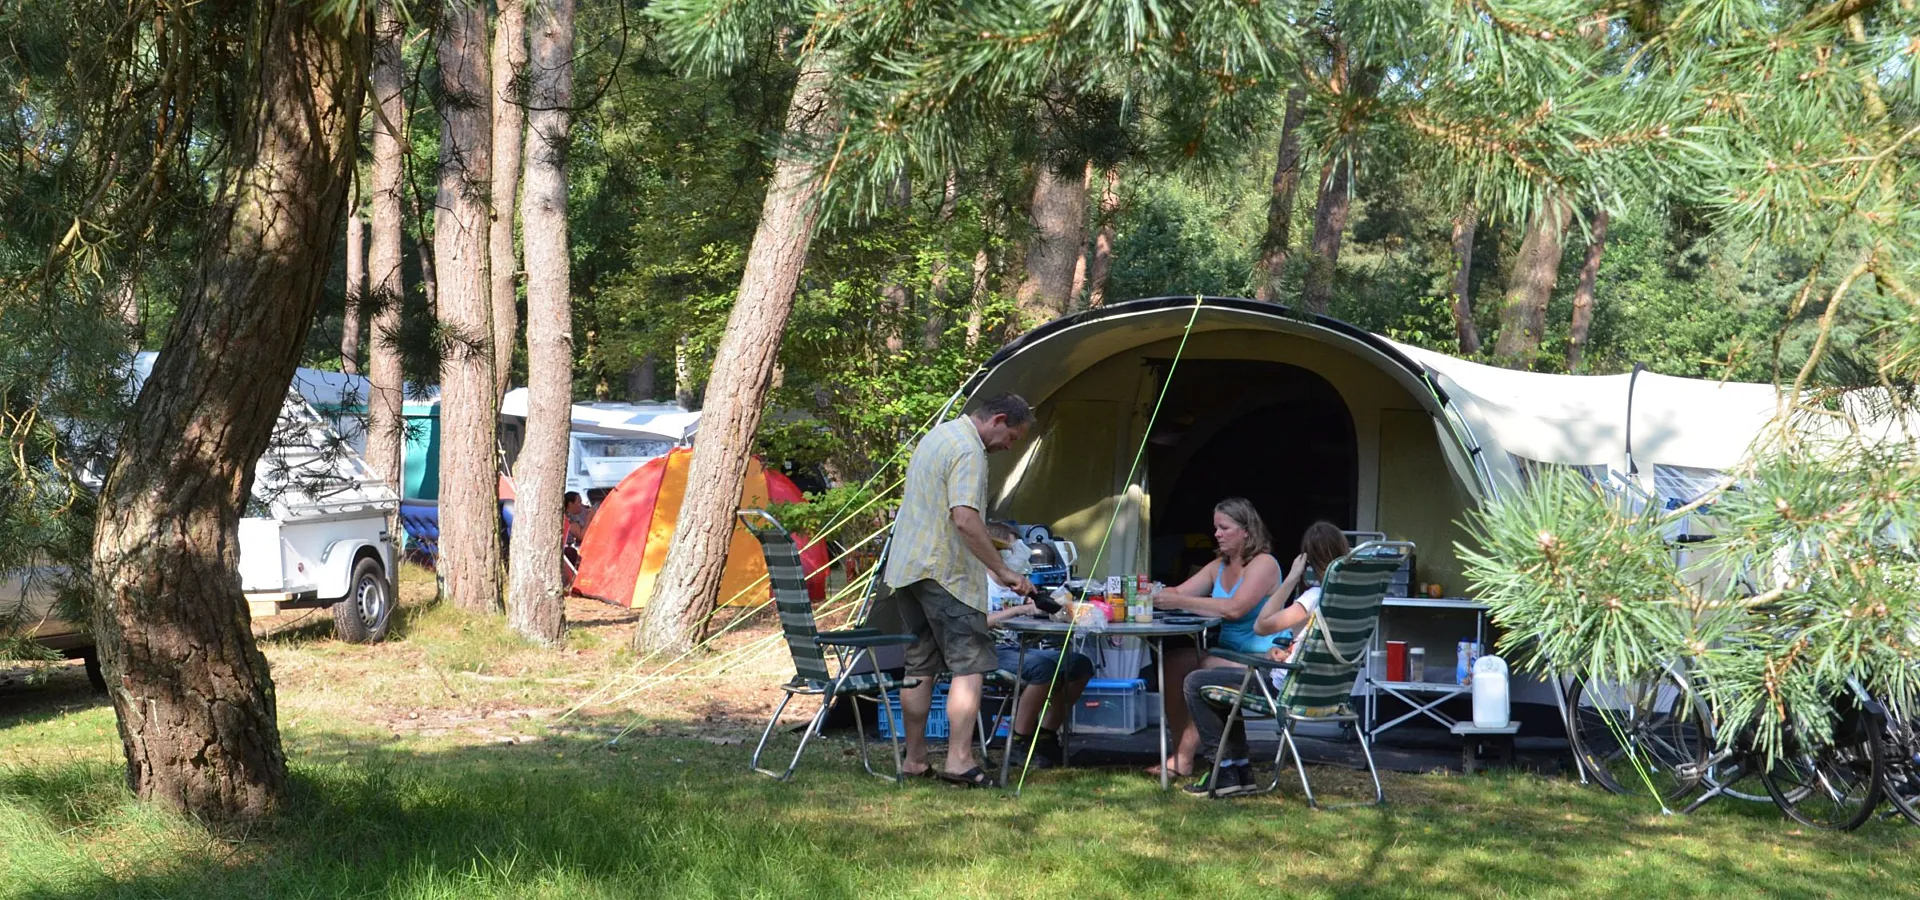 Camping im Wald camping ommerland 8